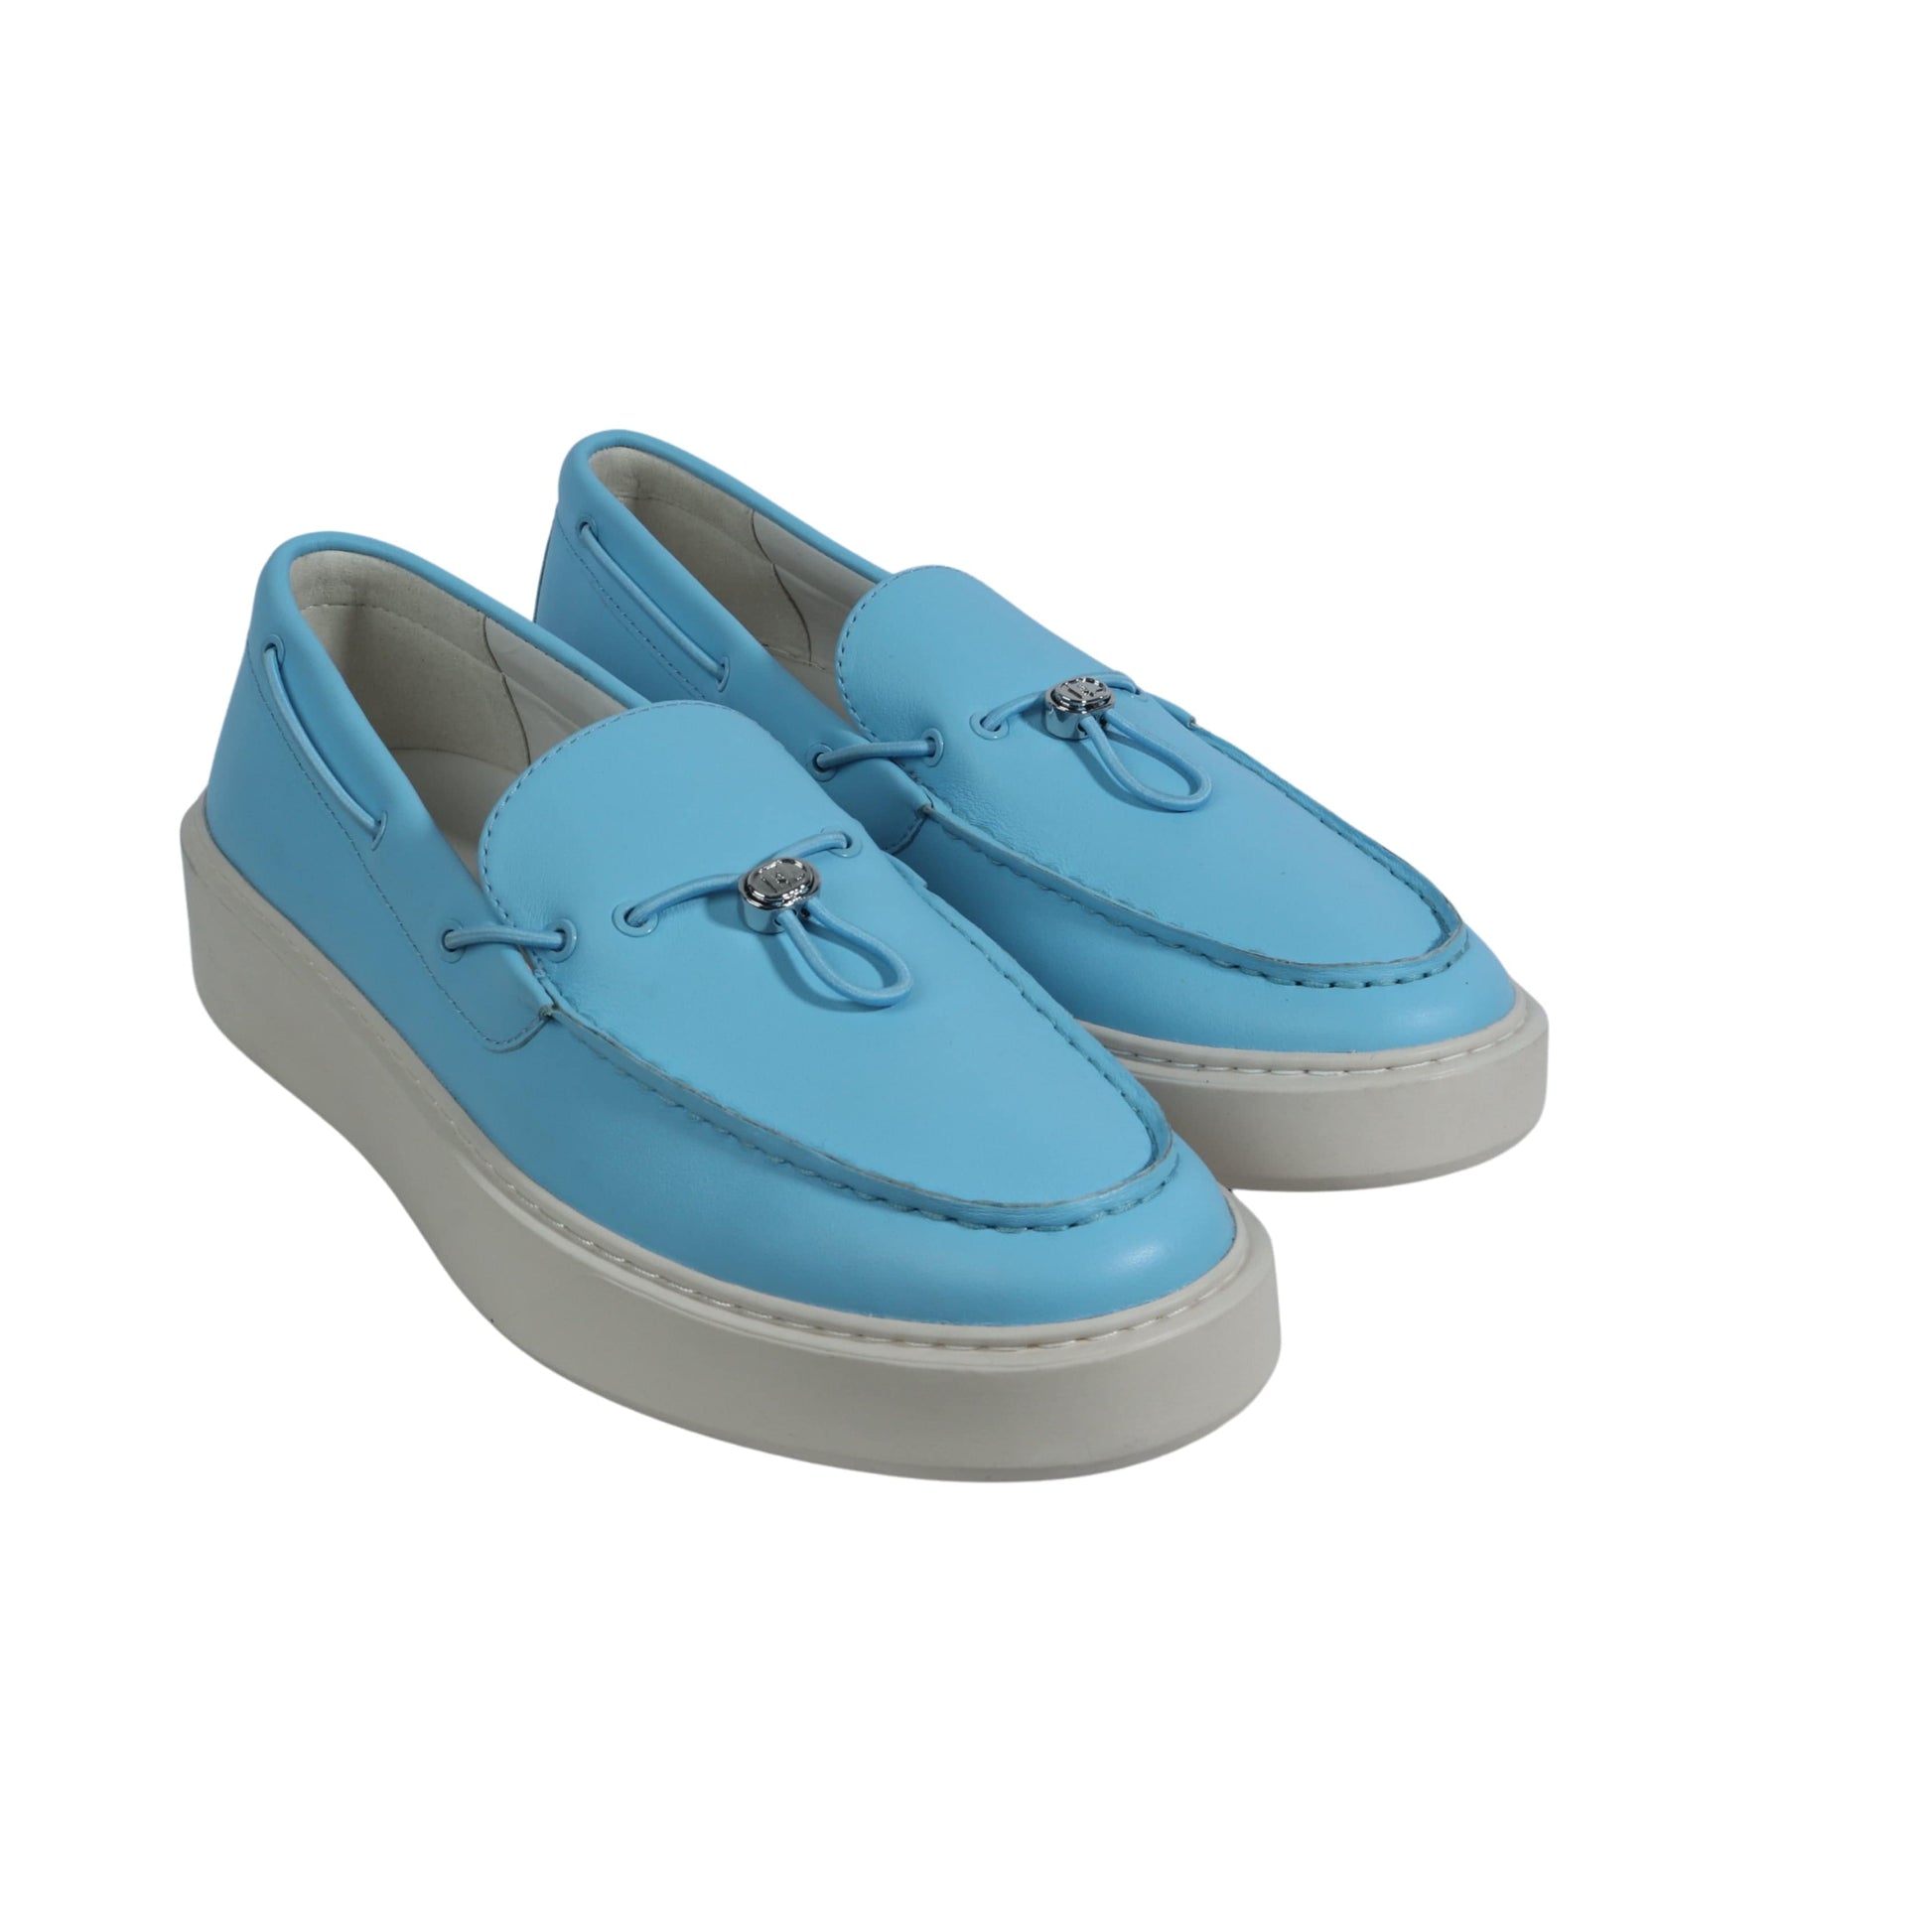 KARL LAGERFELD Mens Shoes 42 / Blue KARL LAGERFELD - Loafer Designed With Strap